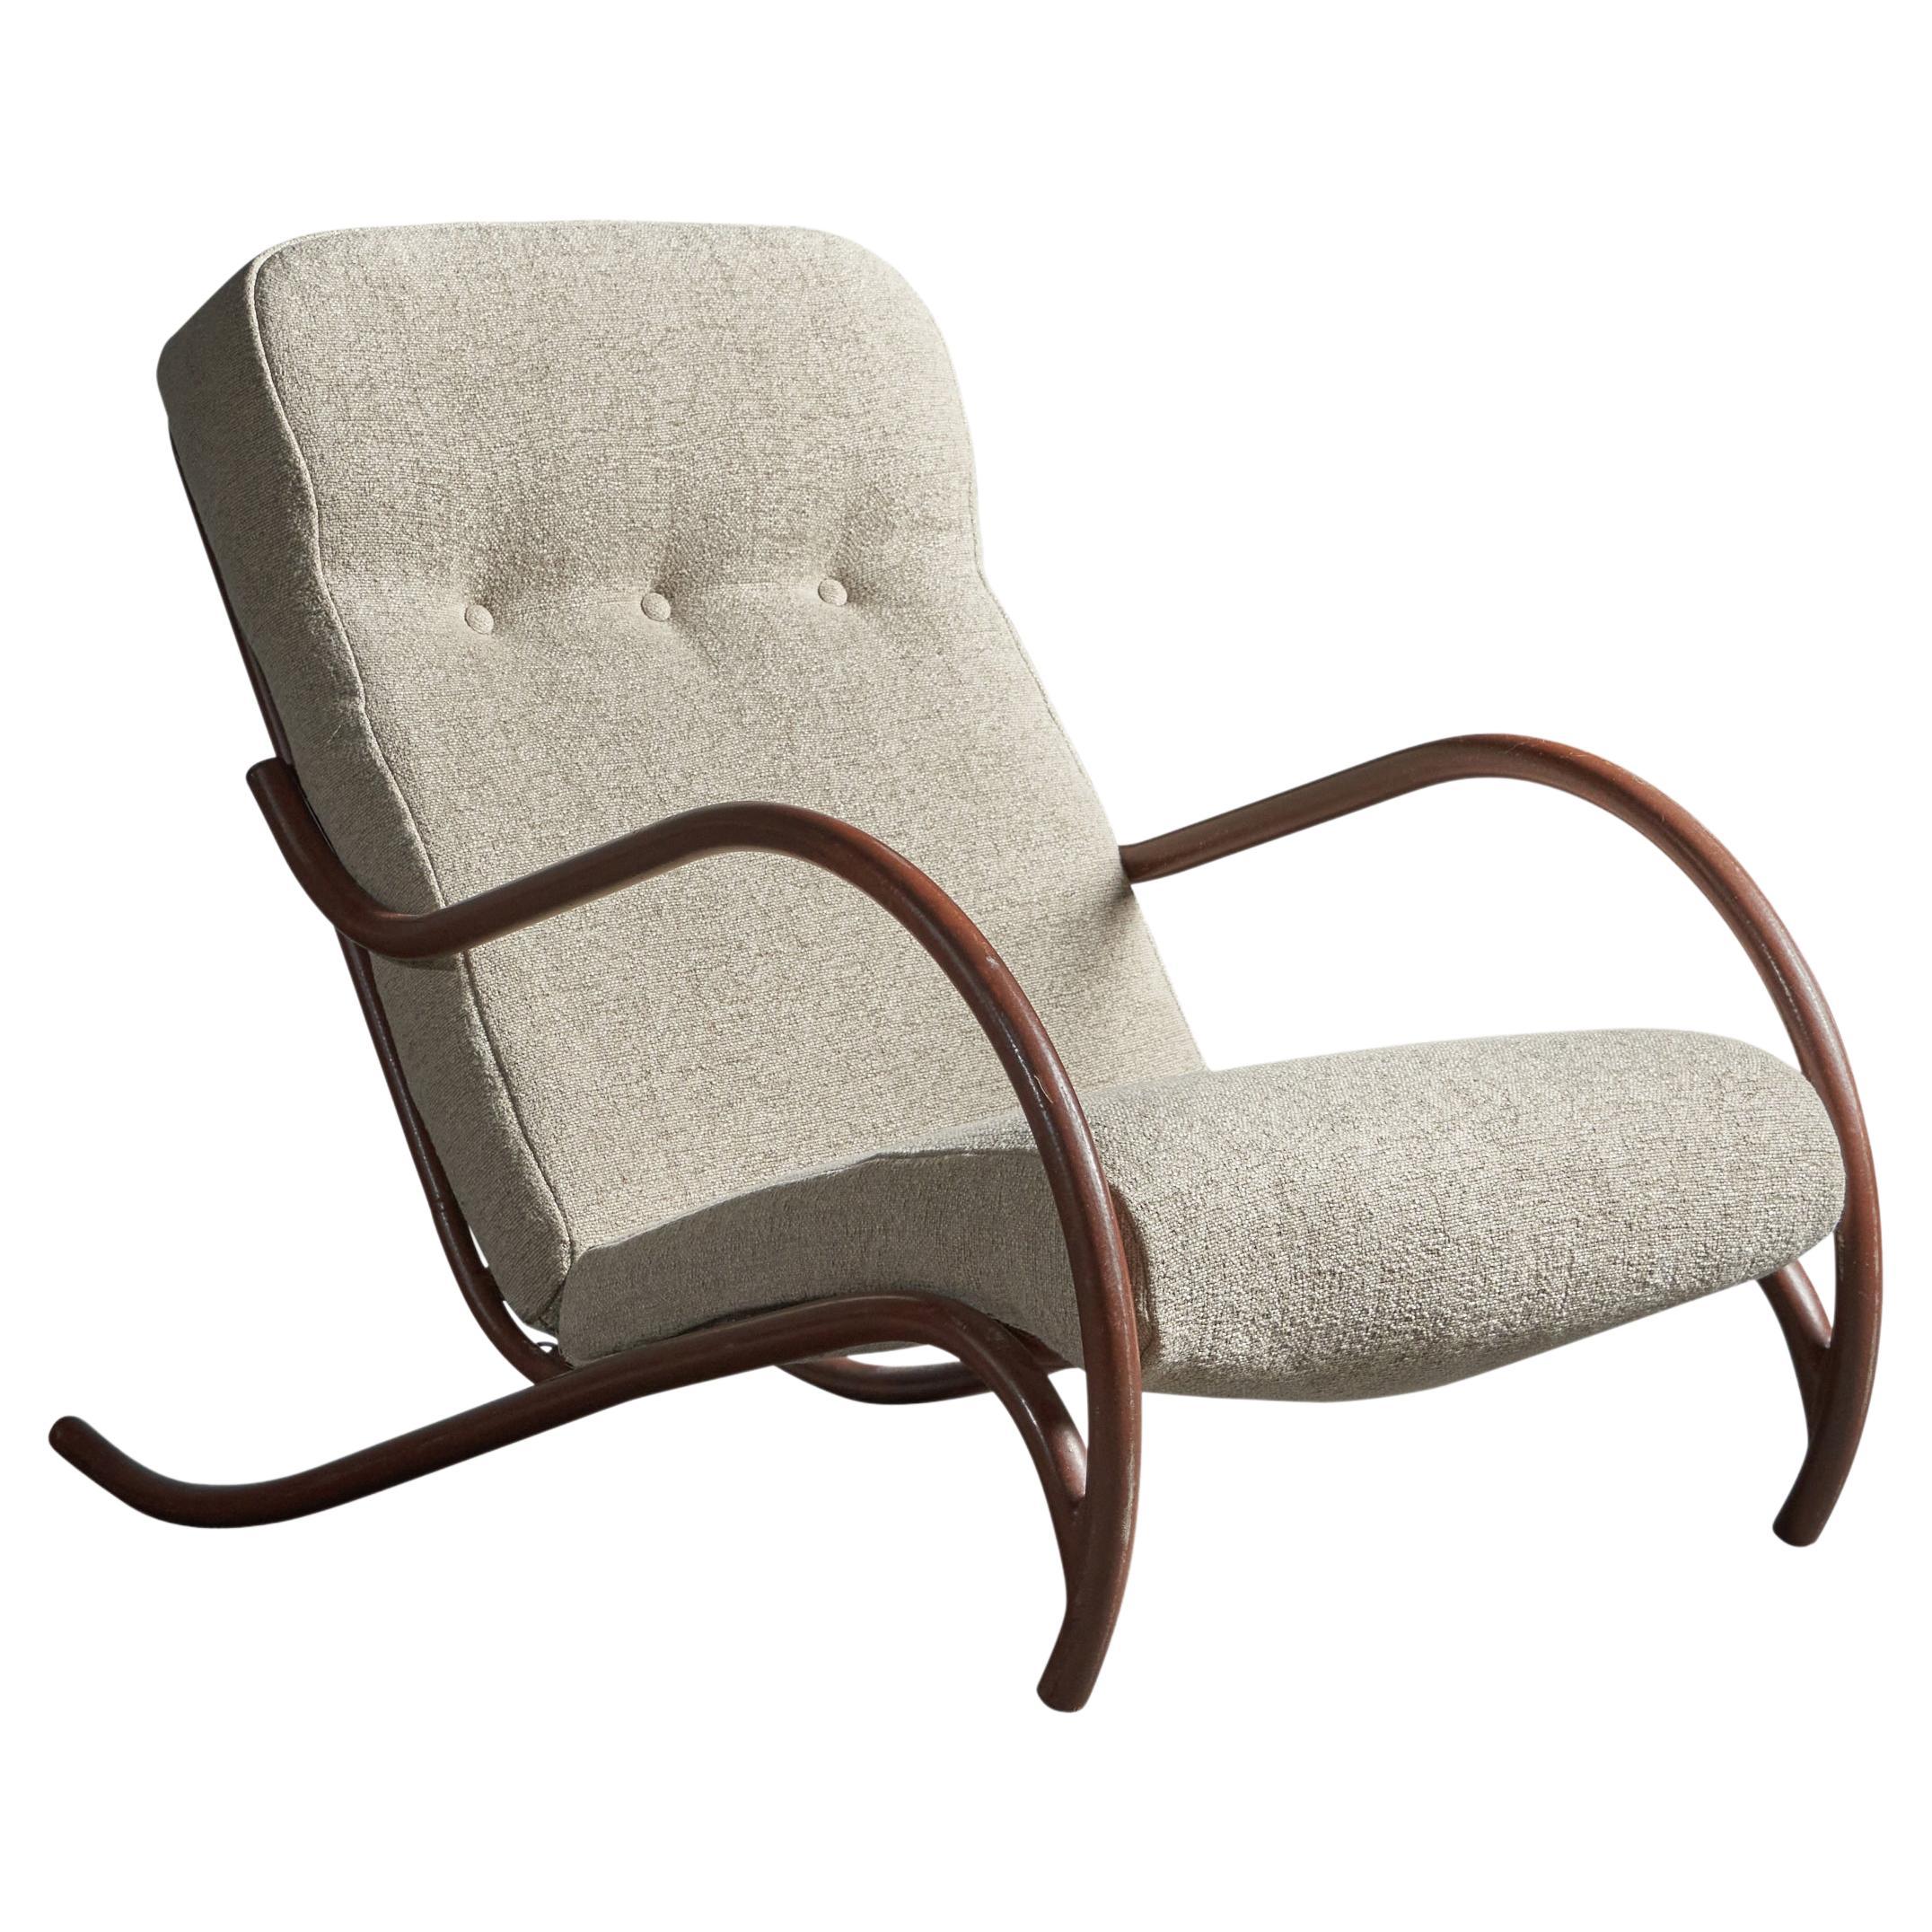 Swedish Designer, Lounge Chair, Metal, Fabric, Sweden, 1930s For Sale